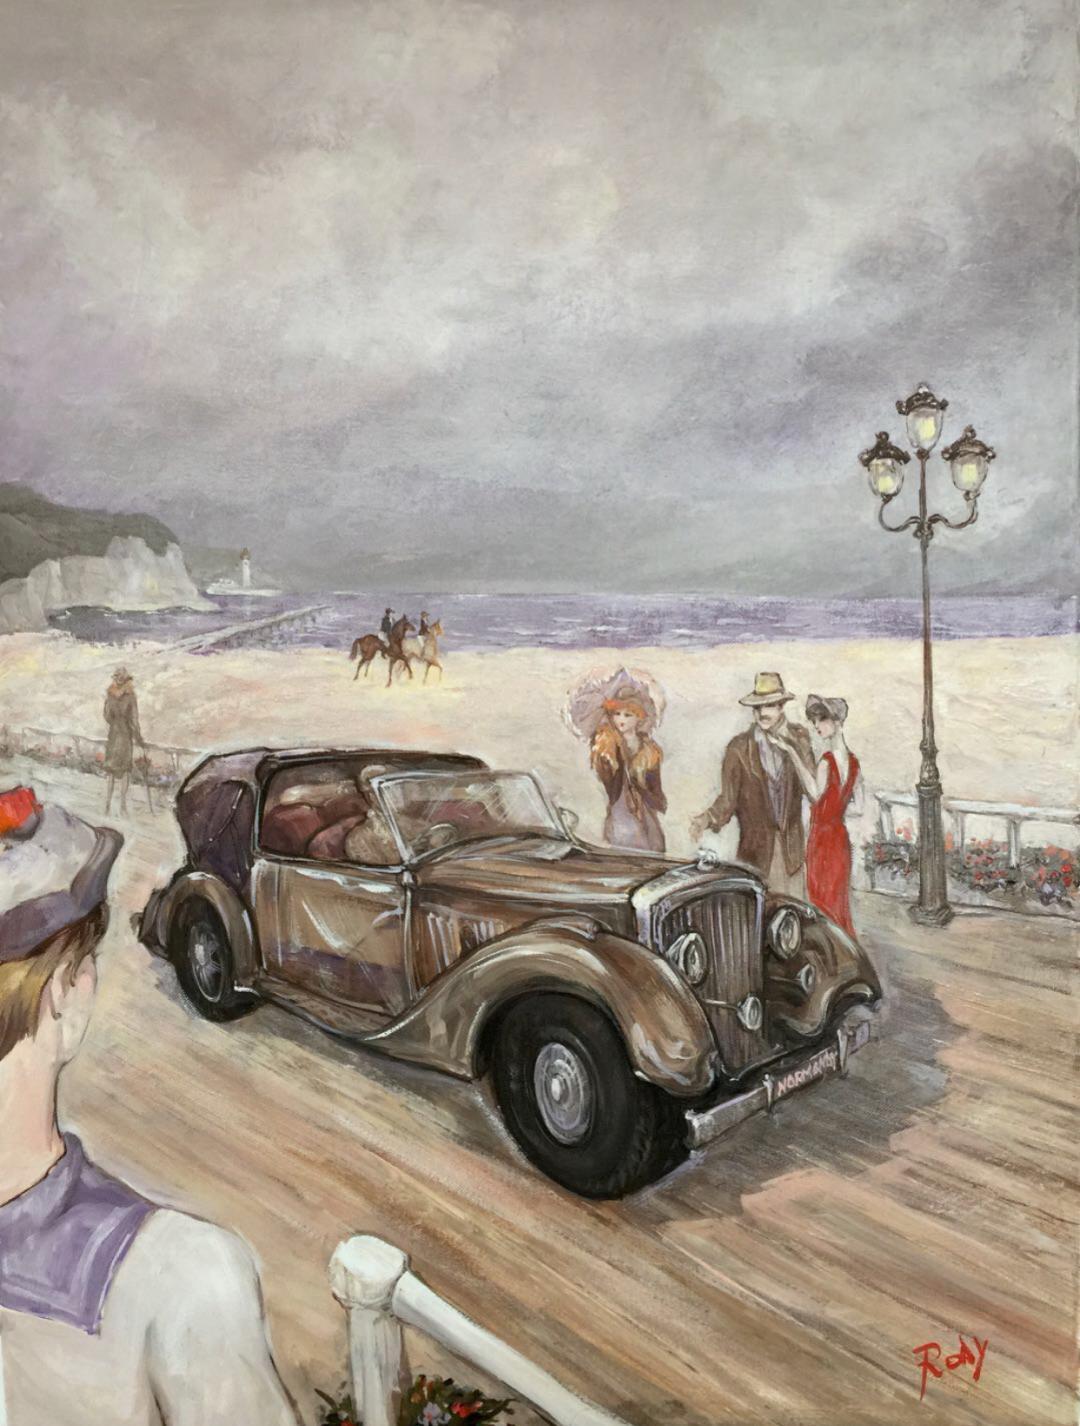 Deauville style - Painting by Rodica Iliesco